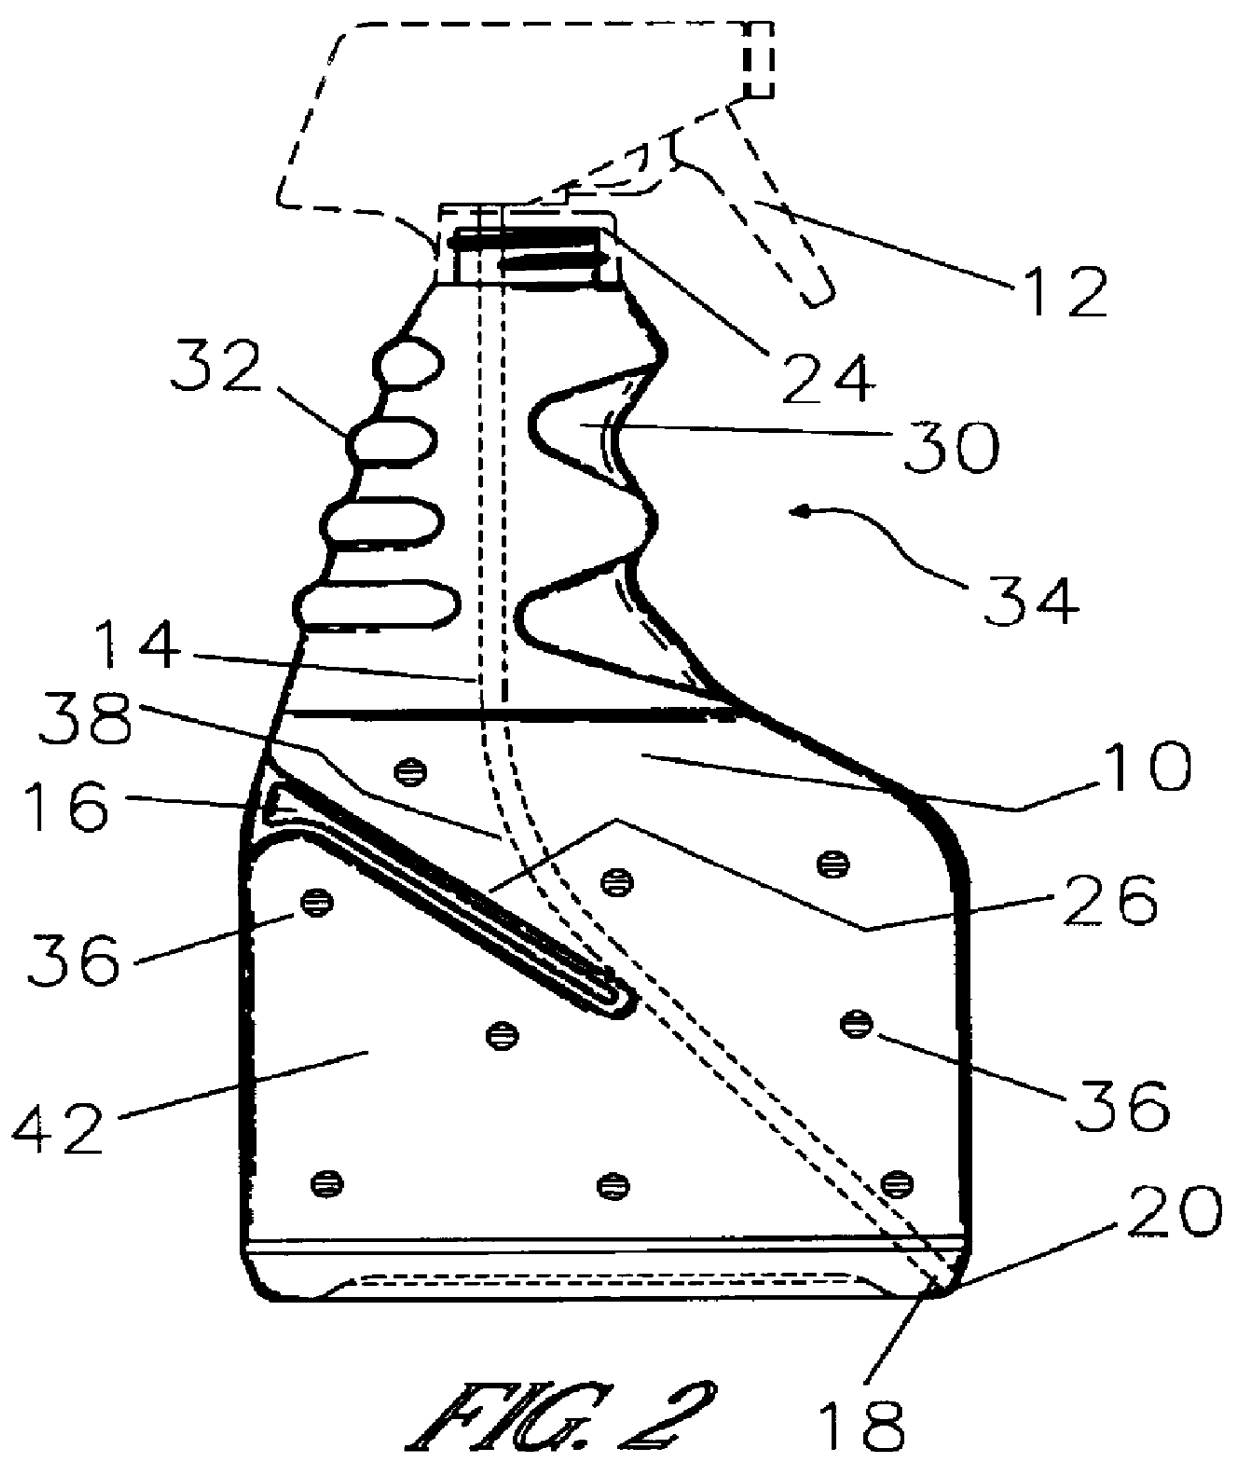 Trigger spray container with integral straw guide